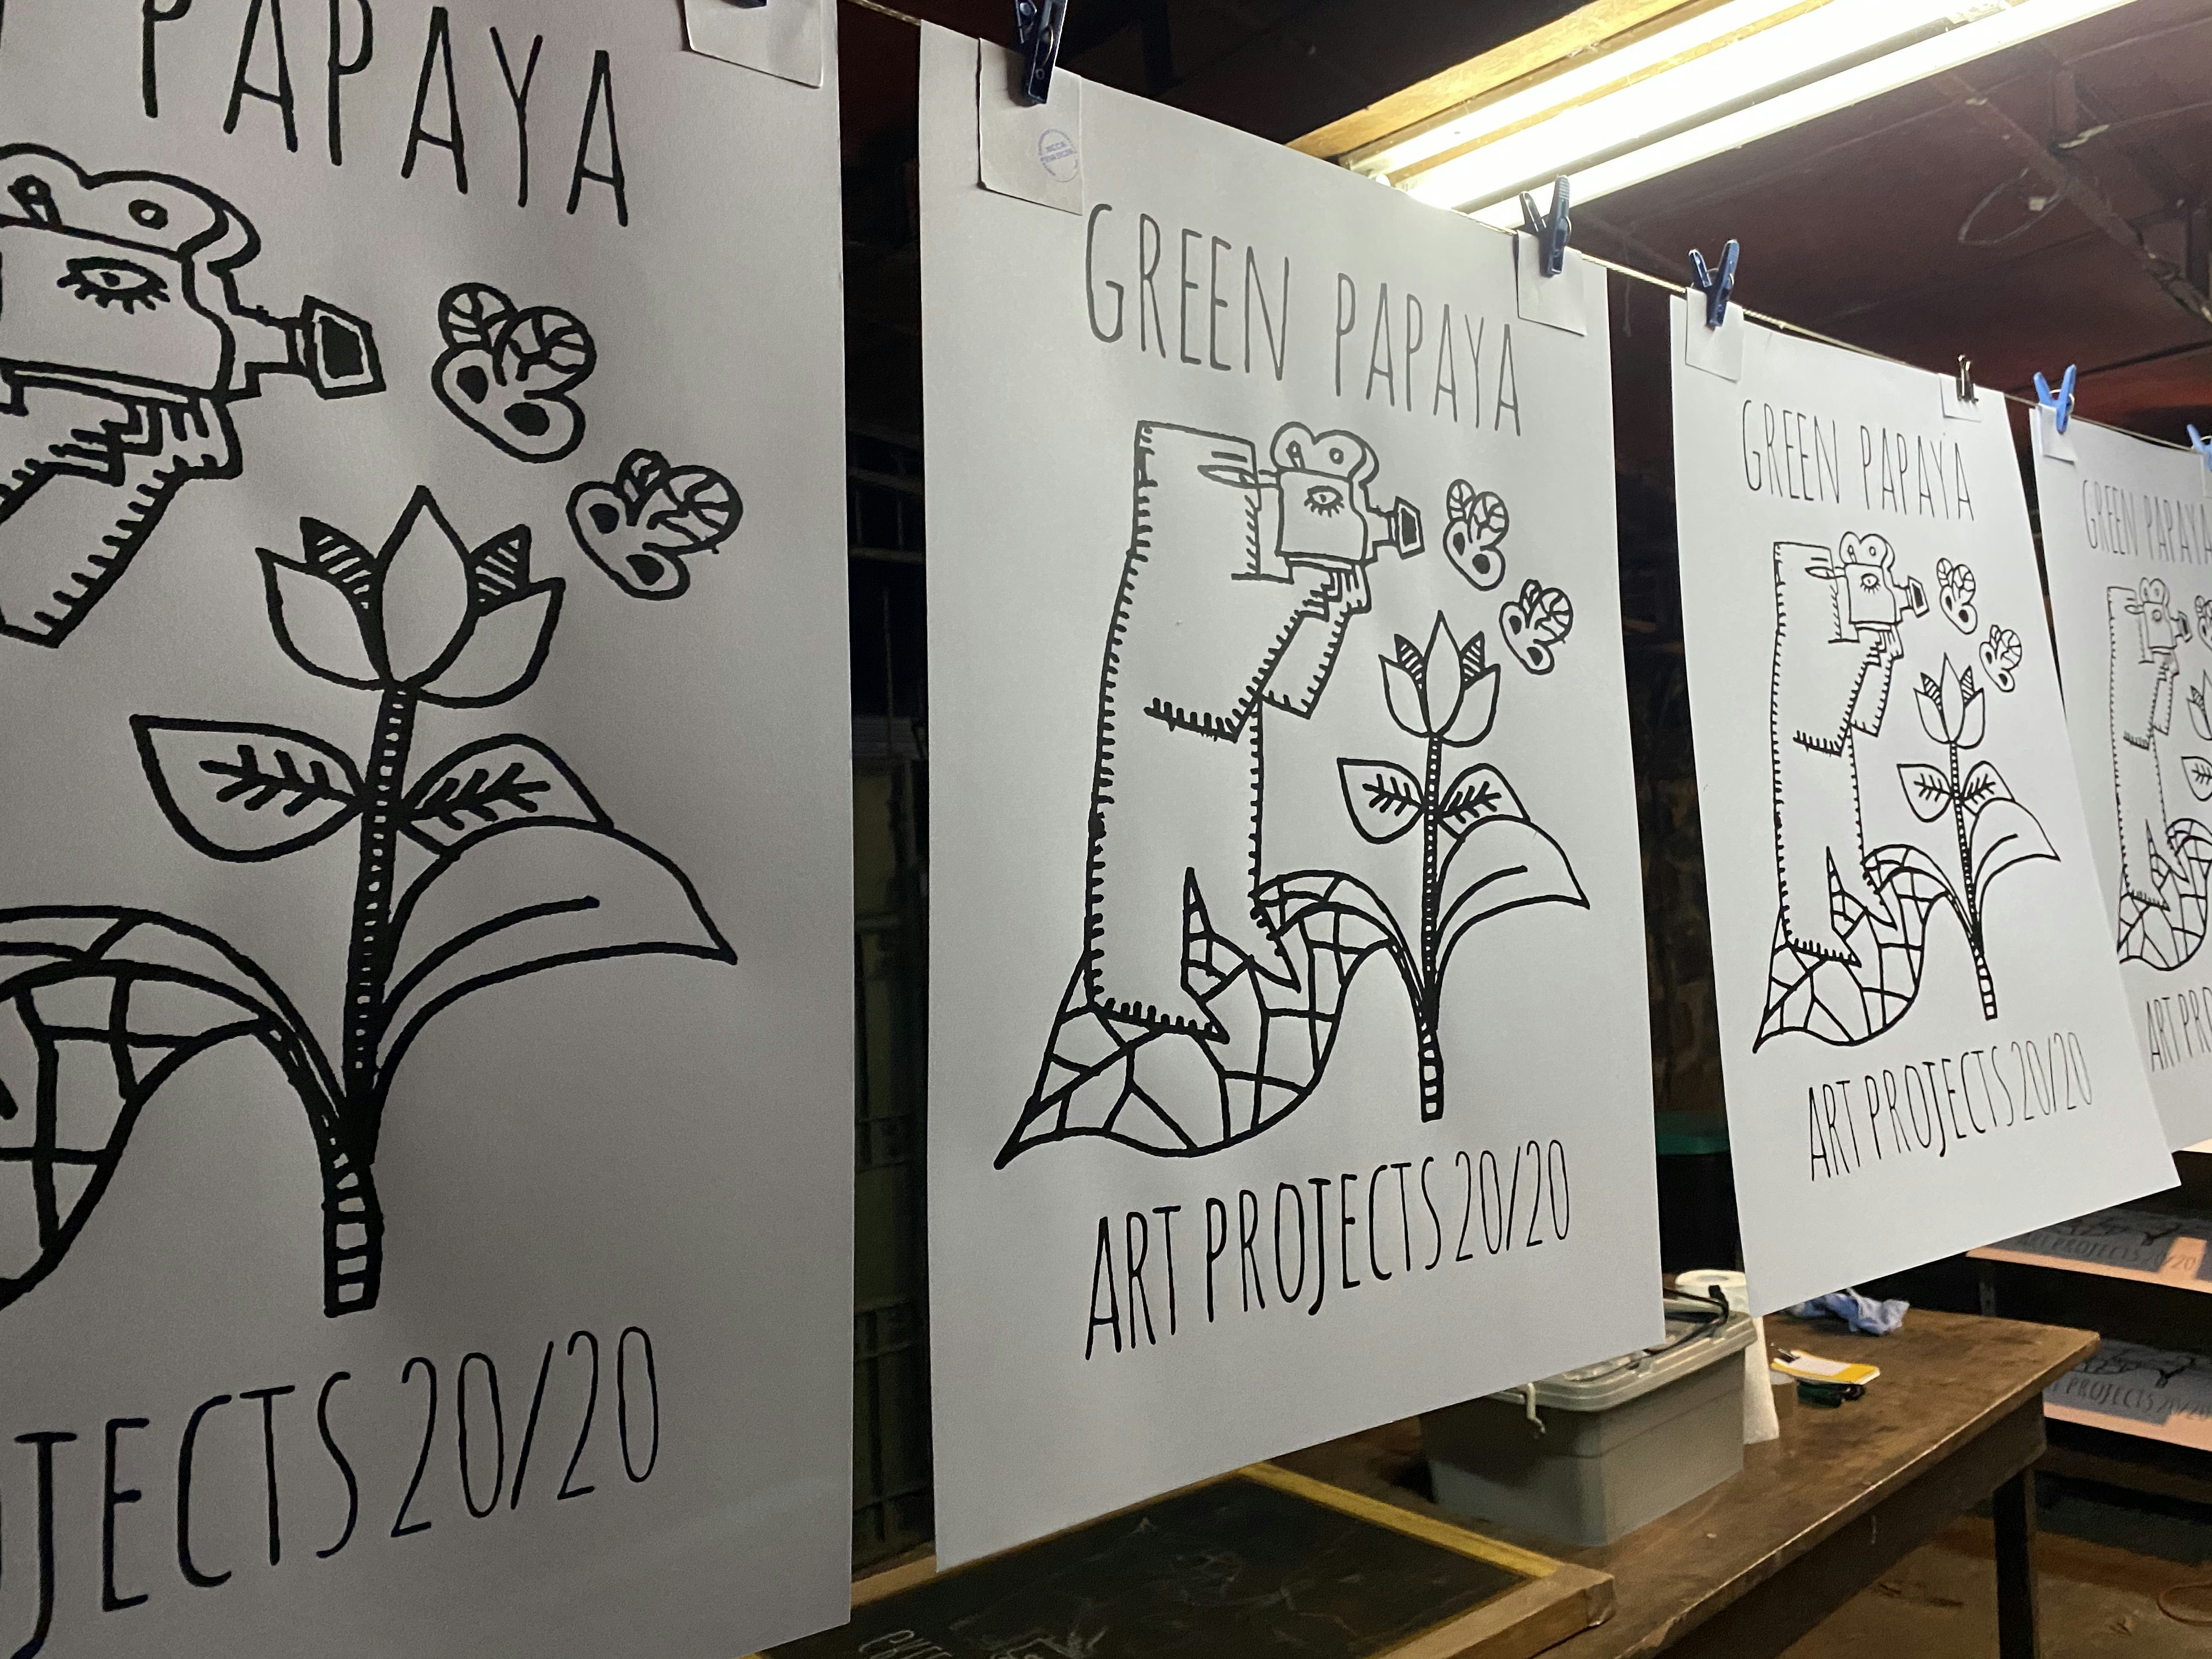 Rox Lee’s commissioned Green Papaya 20 Years Commemorative Poster drying at Sct. Rallos.